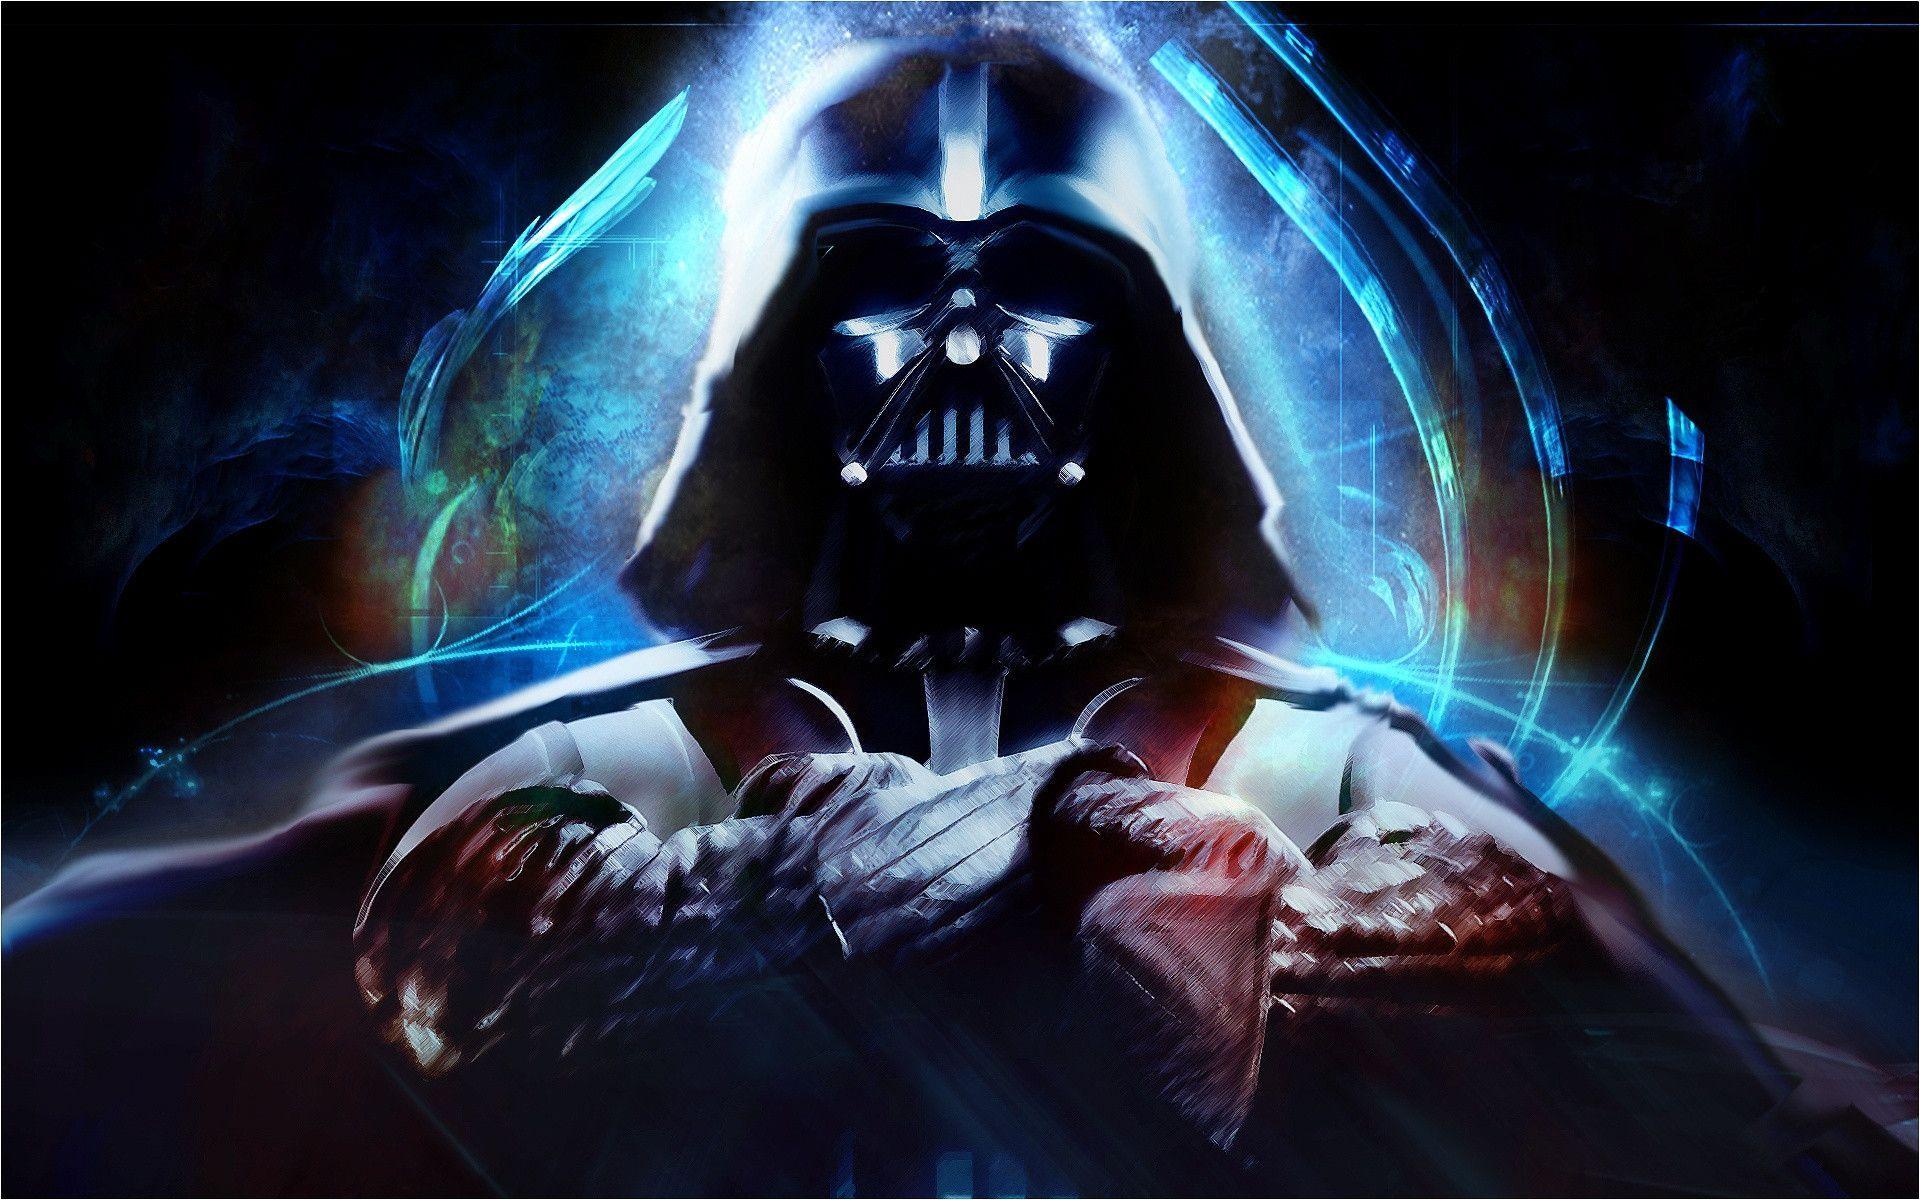 Star Wars Wallpapers - Wallpaper Cave
 Star Wars Star Background